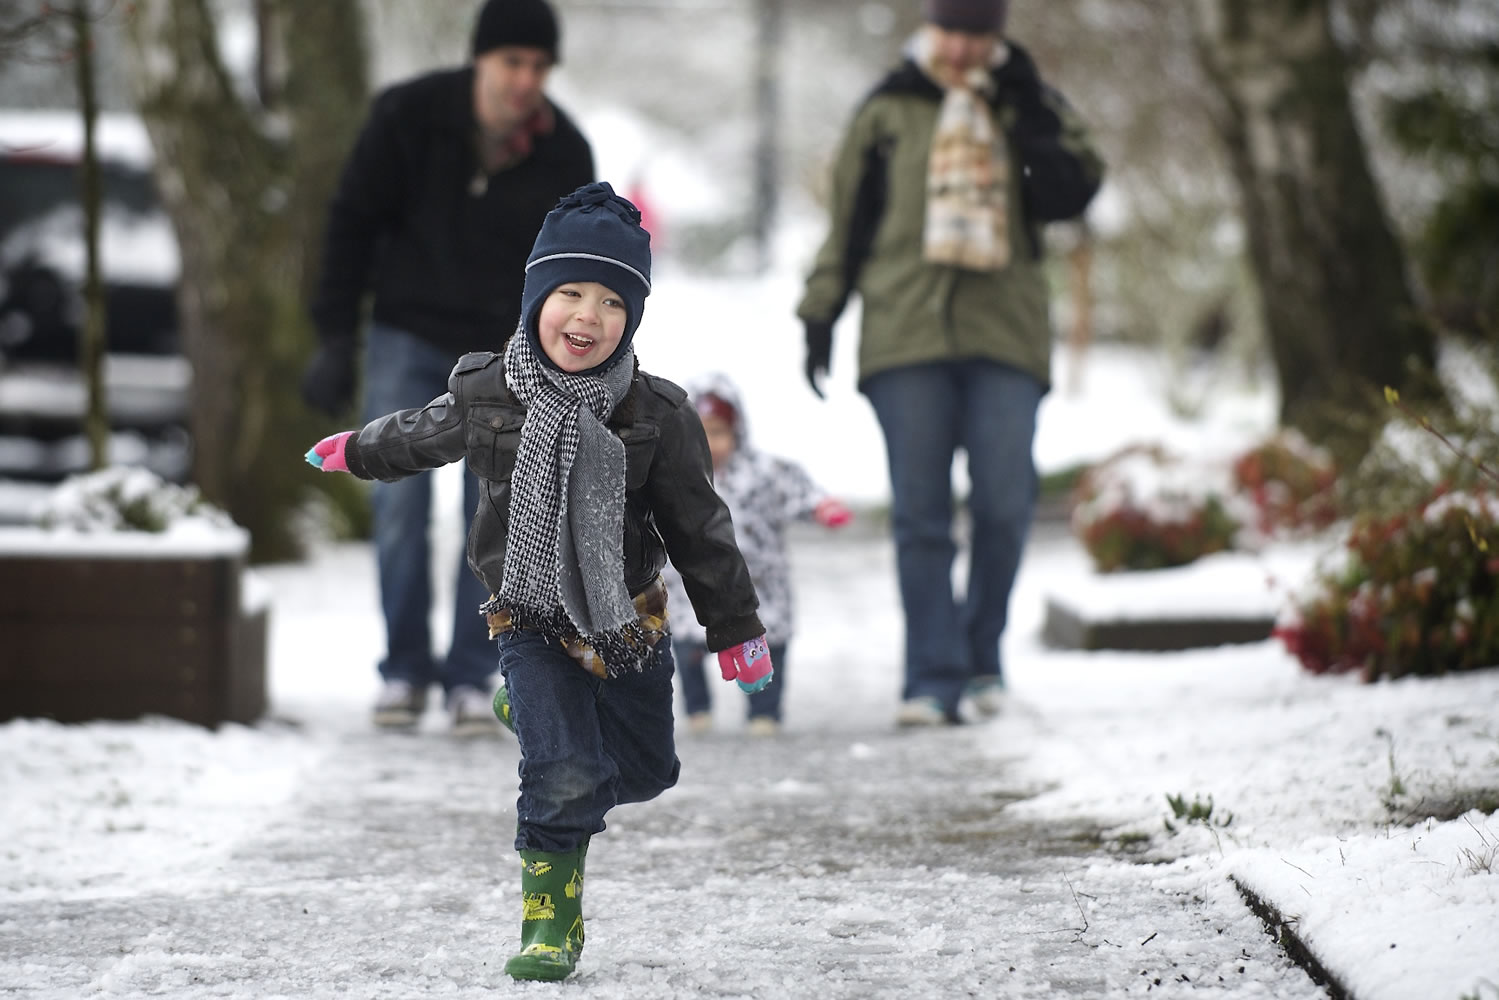 Nolan Bain, 3, frolics in the snow on a morning walk March 22 with his family -- Brian Bain, left, Aurora, 16 months, and Kirby Bain -- in the Lincoln neighborhood of Vancouver.